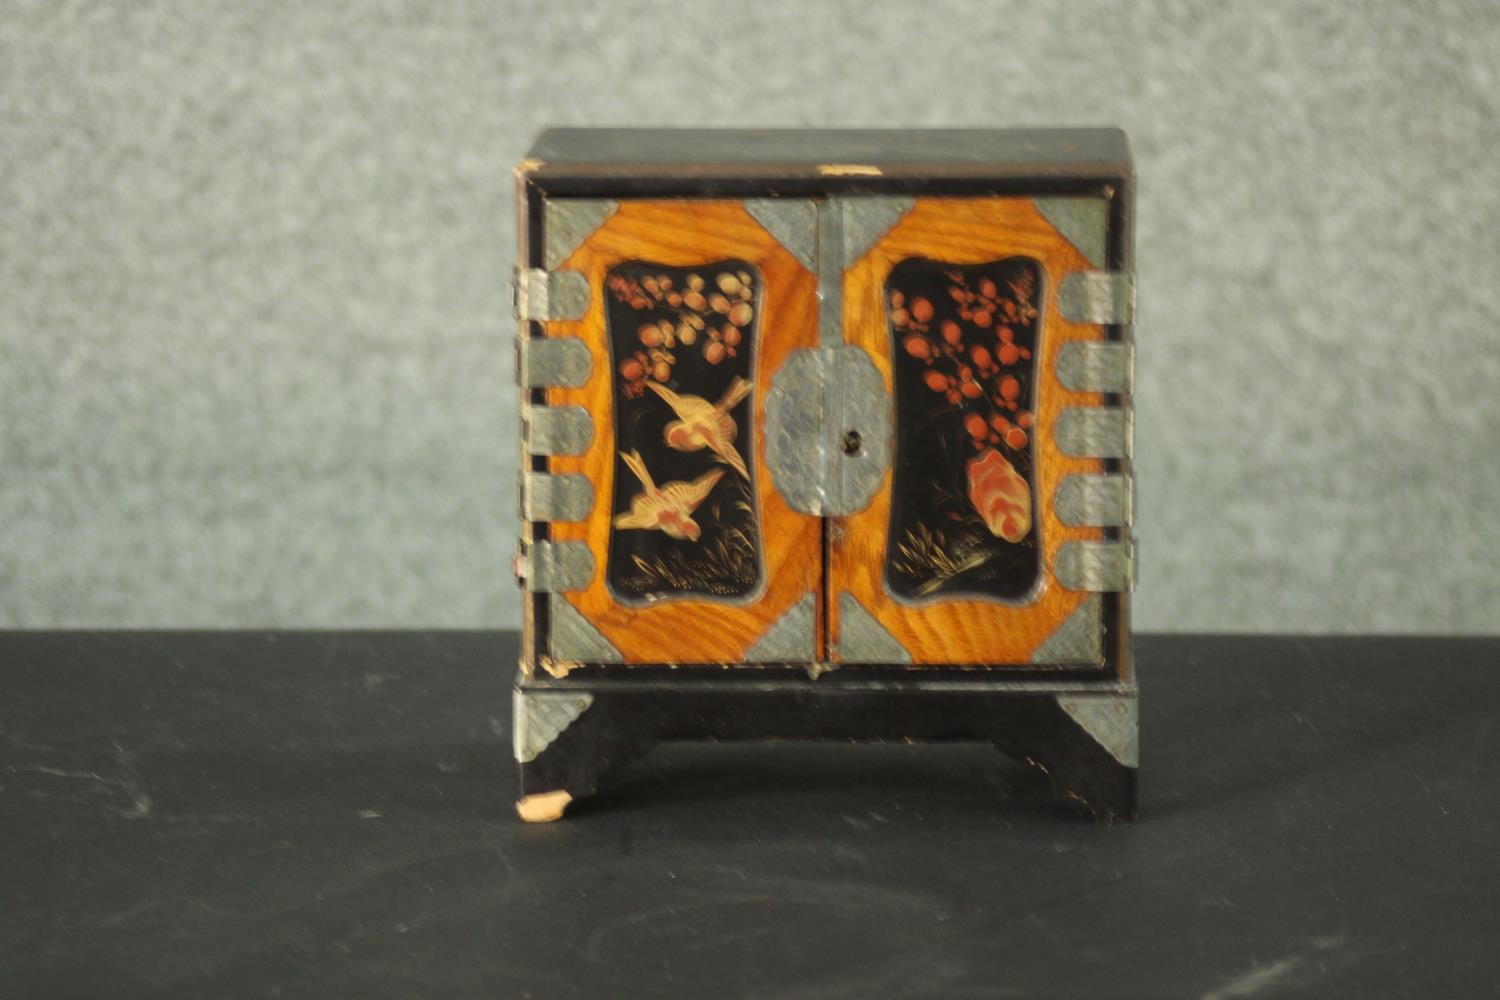 A small Japanese lacquer jewellery cabinet decorated with flowers and birds. (left door does not